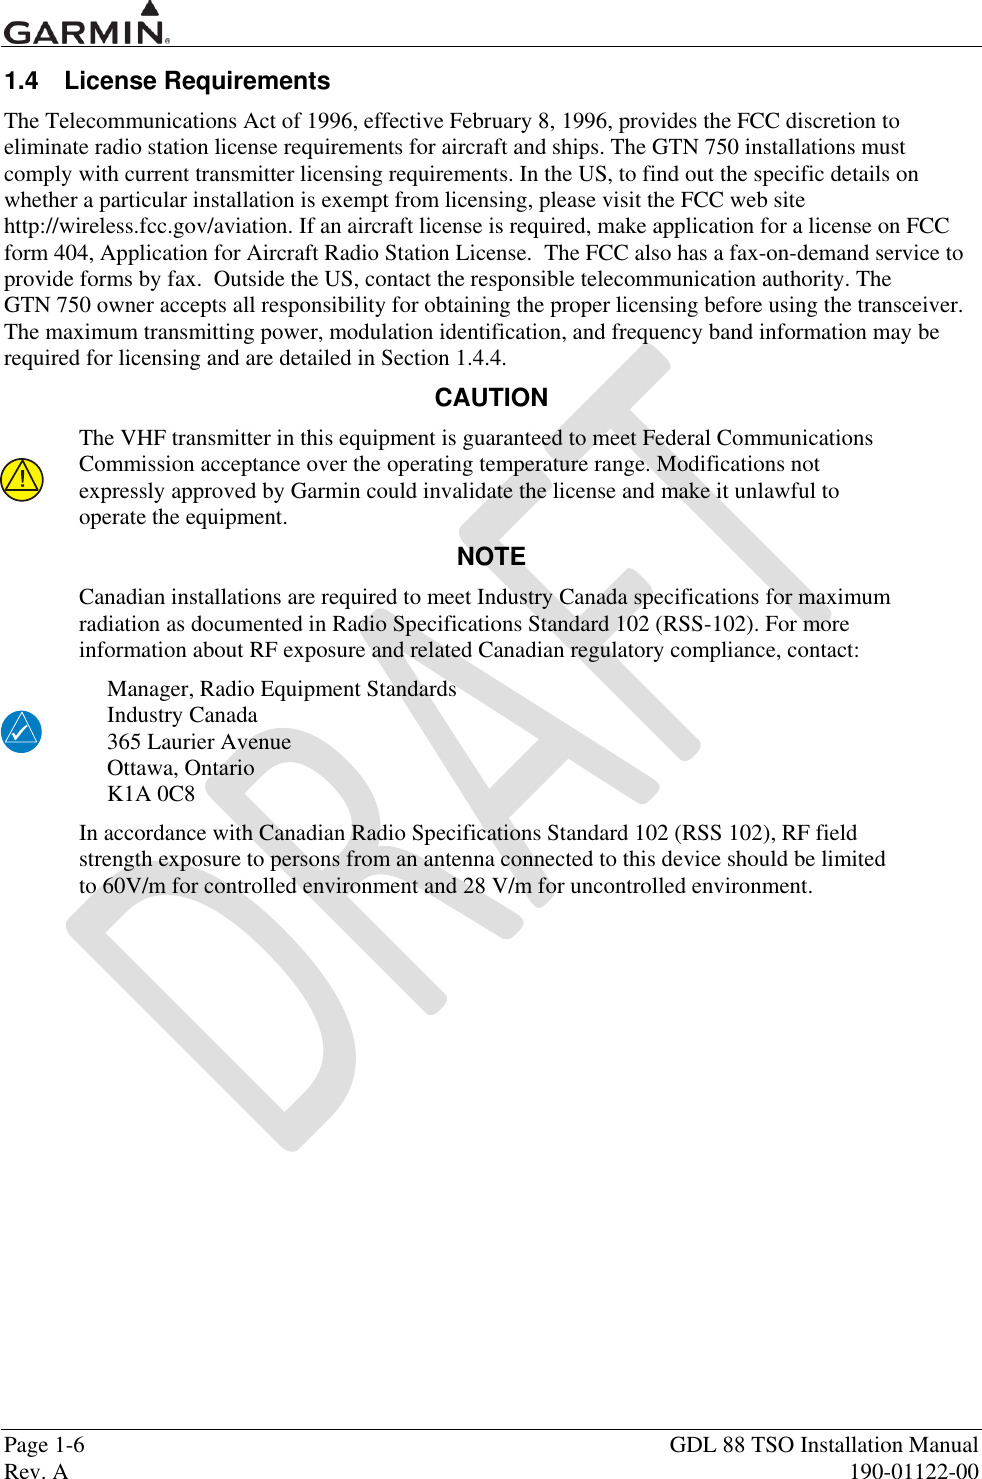  Page 1-6  GDL 88 TSO Installation Manual Rev. A  190-01122-00 1.4  License Requirements The Telecommunications Act of 1996, effective February 8, 1996, provides the FCC discretion to eliminate radio station license requirements for aircraft and ships. The GTN 750 installations must comply with current transmitter licensing requirements. In the US, to find out the specific details on whether a particular installation is exempt from licensing, please visit the FCC web site http://wireless.fcc.gov/aviation. If an aircraft license is required, make application for a license on FCC form 404, Application for Aircraft Radio Station License.  The FCC also has a fax-on-demand service to provide forms by fax.  Outside the US, contact the responsible telecommunication authority. The  GTN 750 owner accepts all responsibility for obtaining the proper licensing before using the transceiver.  The maximum transmitting power, modulation identification, and frequency band information may be required for licensing and are detailed in Section 1.4.4. CAUTION The VHF transmitter in this equipment is guaranteed to meet Federal Communications Commission acceptance over the operating temperature range. Modifications not expressly approved by Garmin could invalidate the license and make it unlawful to operate the equipment. NOTE Canadian installations are required to meet Industry Canada specifications for maximum radiation as documented in Radio Specifications Standard 102 (RSS-102). For more information about RF exposure and related Canadian regulatory compliance, contact: Manager, Radio Equipment Standards Industry Canada 365 Laurier Avenue Ottawa, Ontario K1A 0C8 In accordance with Canadian Radio Specifications Standard 102 (RSS 102), RF field strength exposure to persons from an antenna connected to this device should be limited to 60V/m for controlled environment and 28 V/m for uncontrolled environment.   